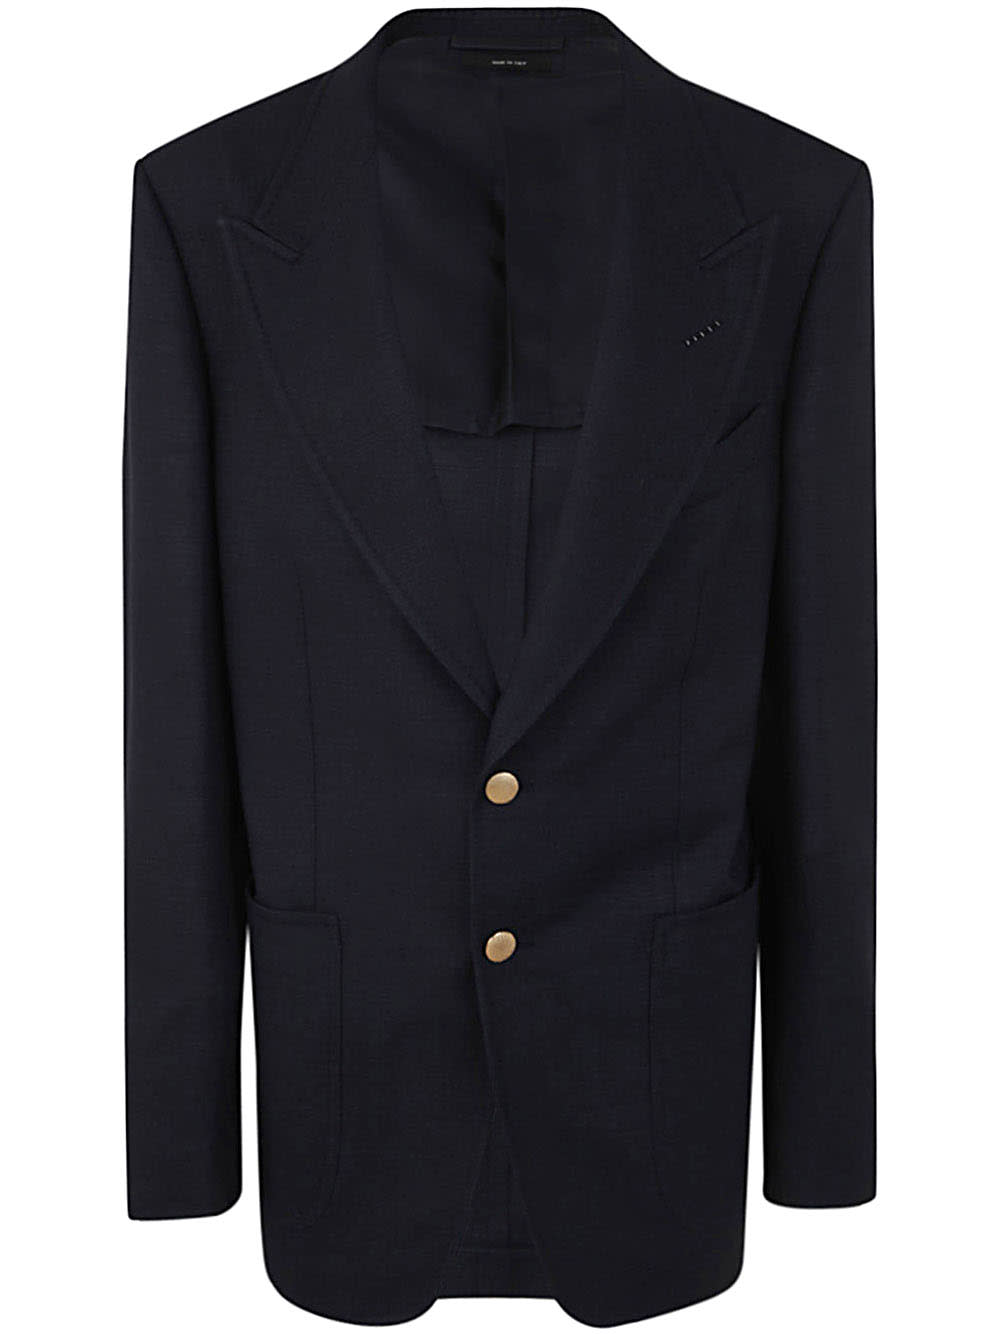 TOM FORD SINGLE BREASTED JACKET